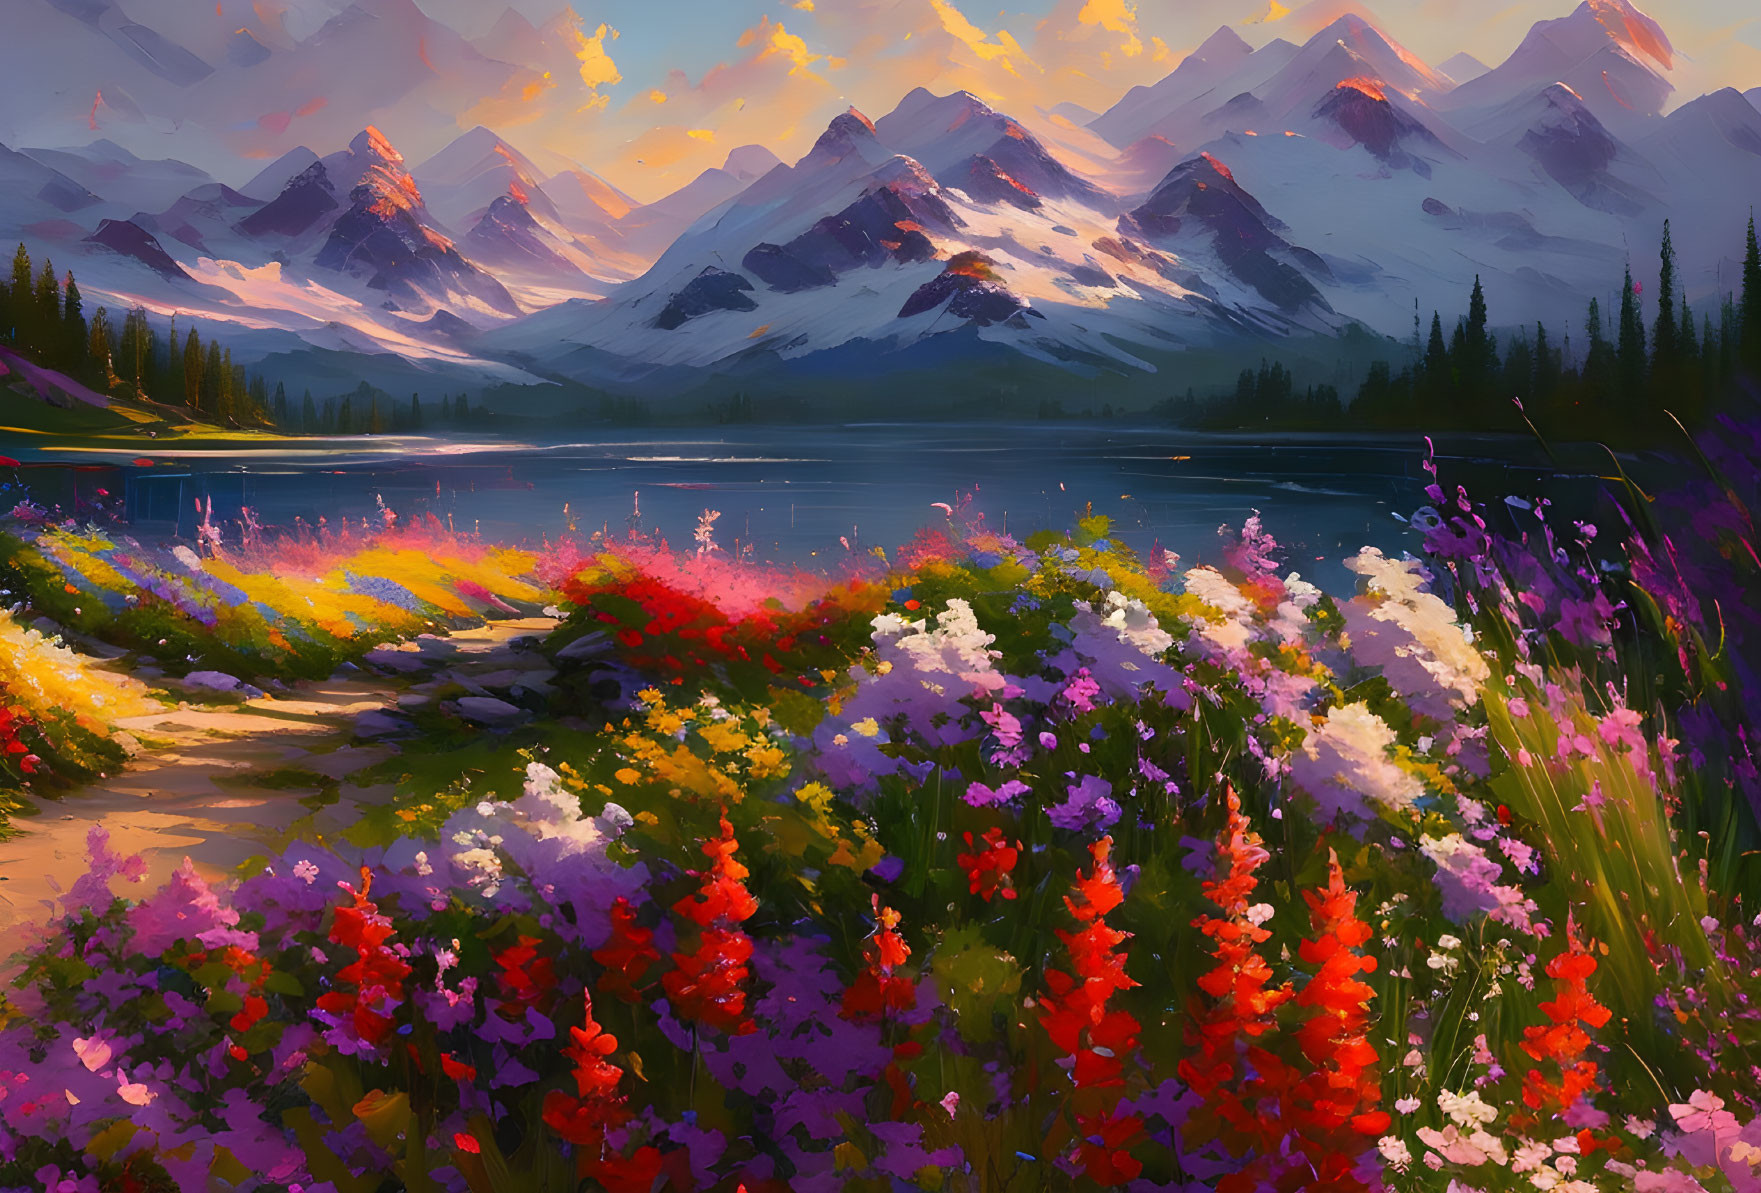 Wildflowers, lake, mountains, and pastel sky at dusk